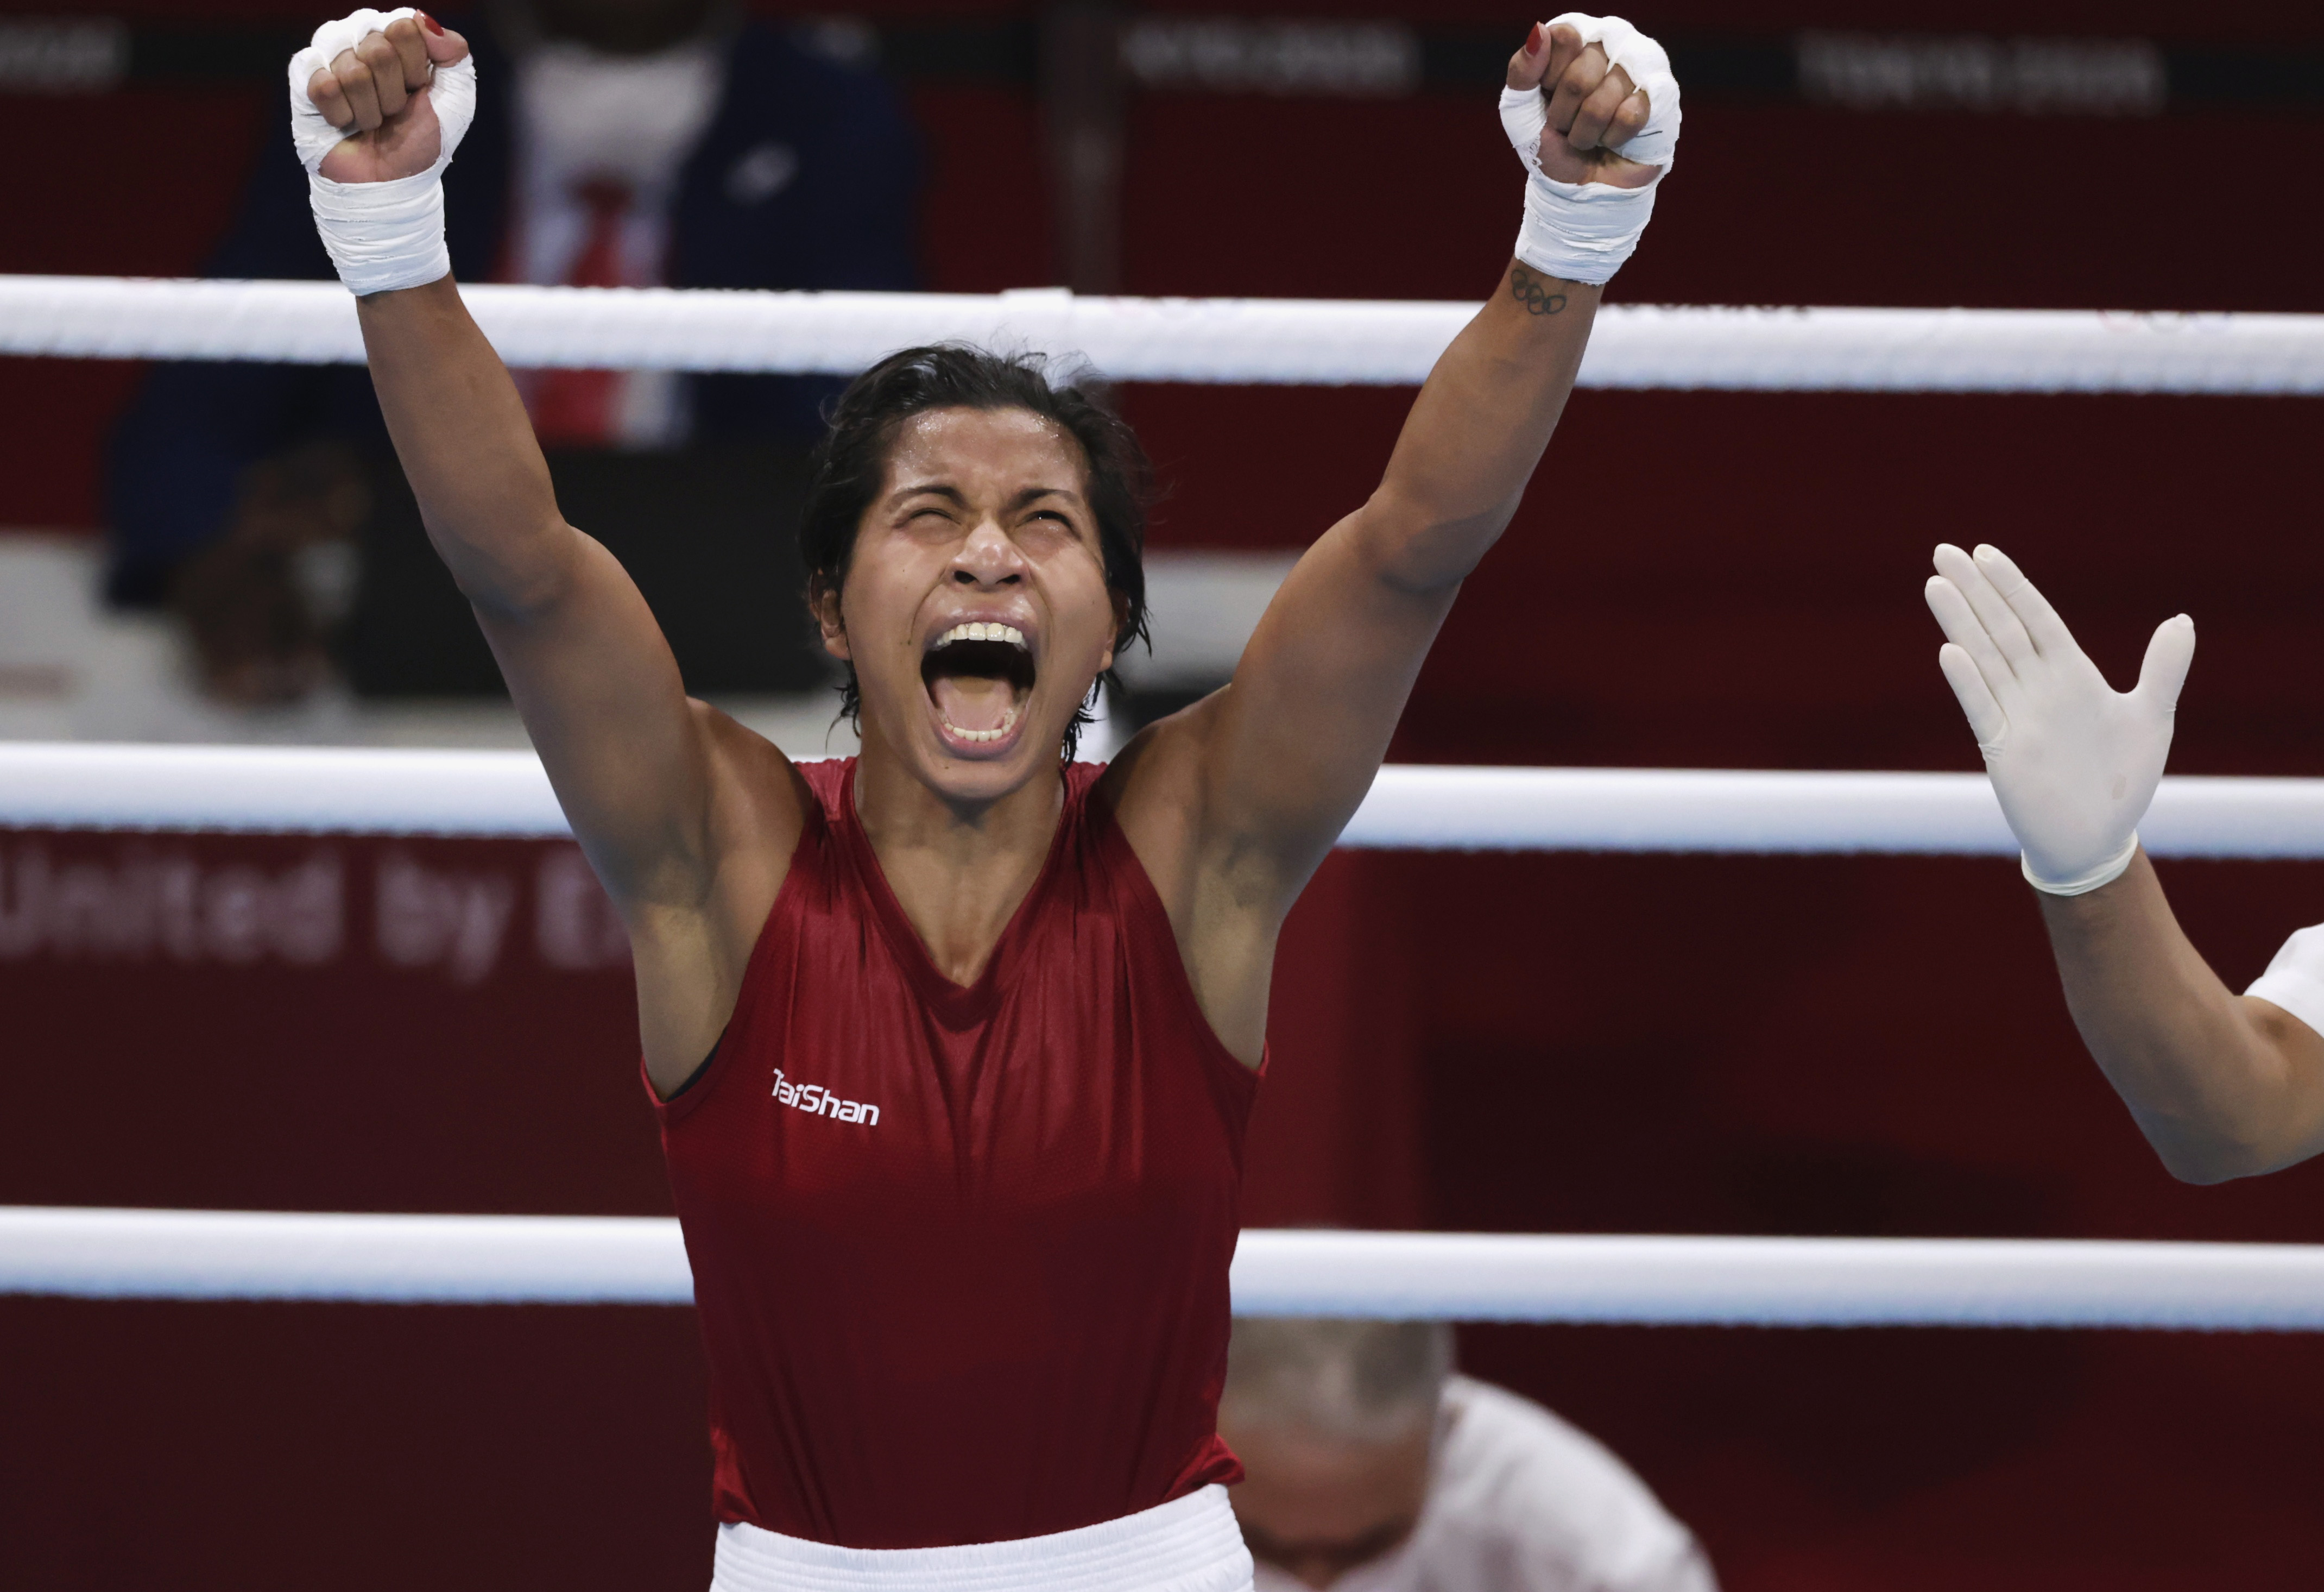 Tokyo 2020 Olympics - Boxing - Women's Welterweight - Quarterfinal - Kokugikan Arena - Tokyo, Japan - July 30, 2021. Lovlina Borgohain of India celebrates after the fight against Chen Nien-Chin of Taiwan. REUTERS/Ueslei Marcelino